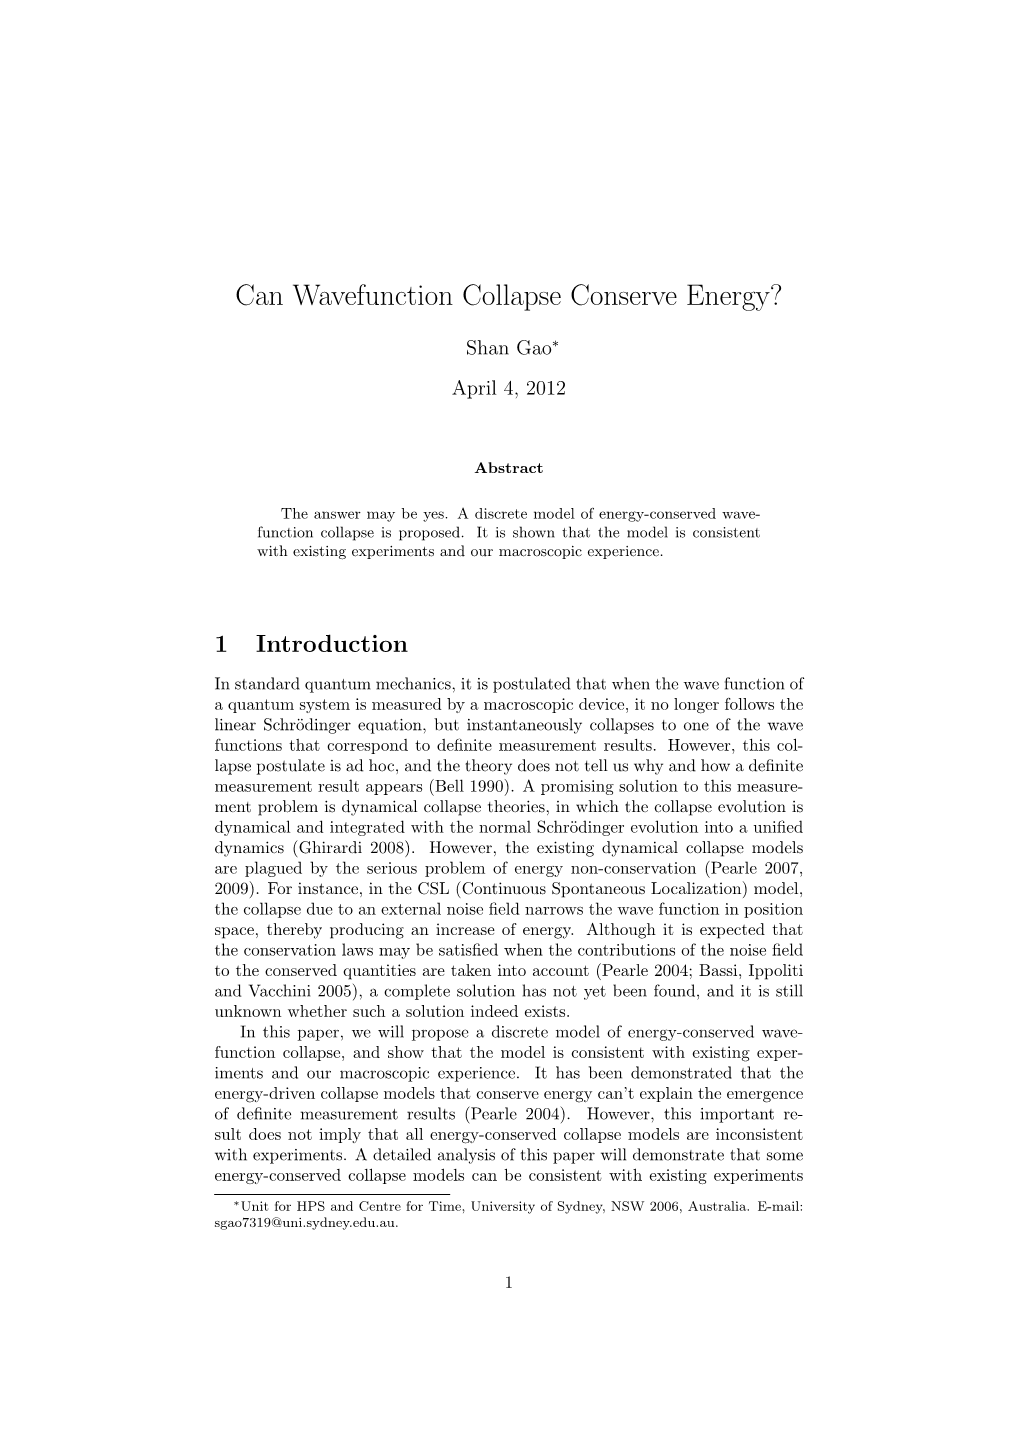 Can Wavefunction Collapse Conserve Energy?